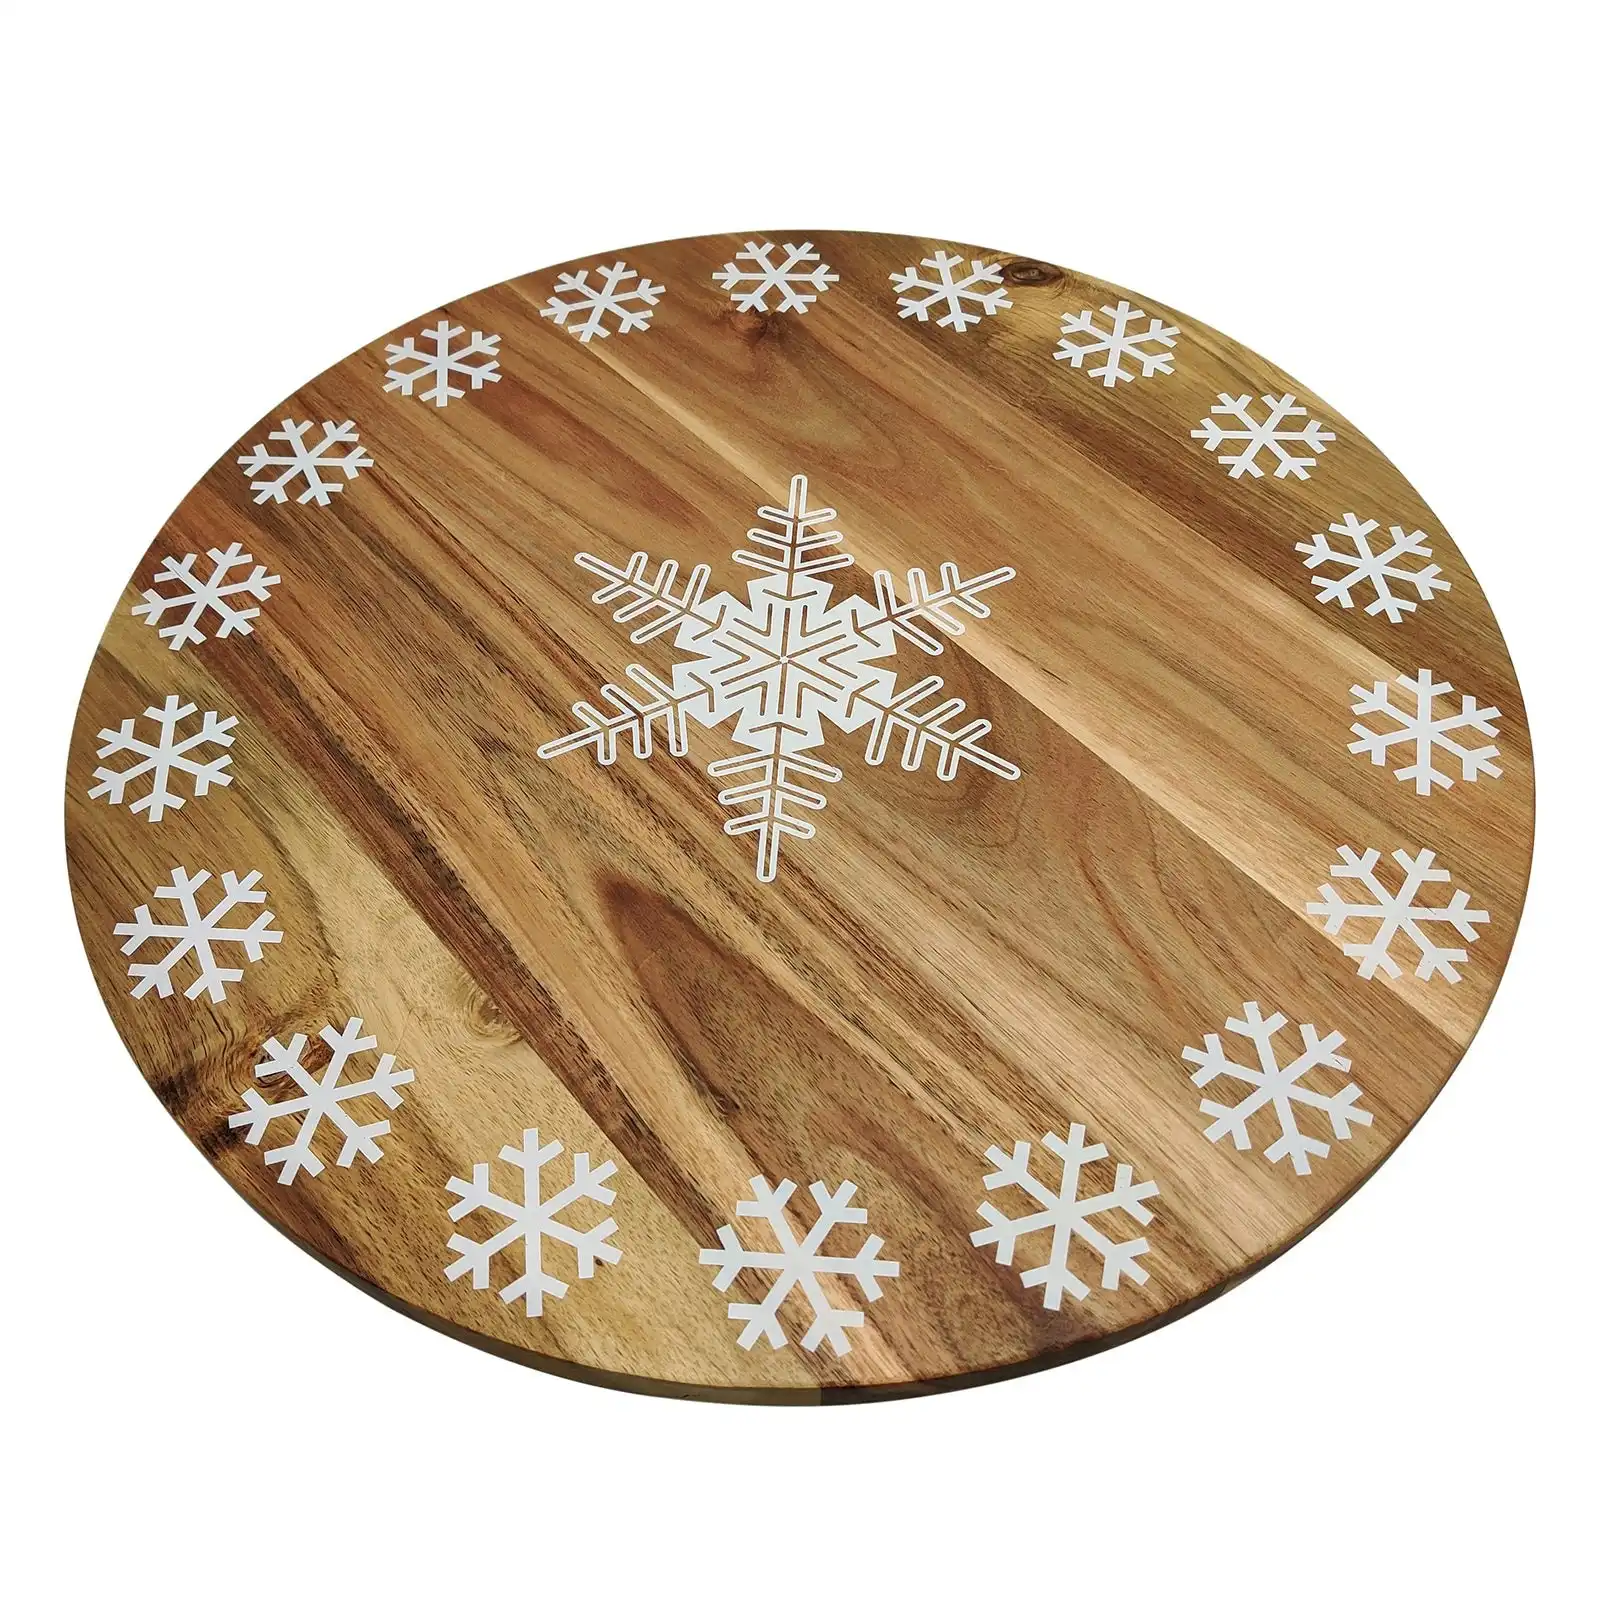 Bread and Butter 18 Inch Print Wooden Lazy Susan Tray - White Snowflake